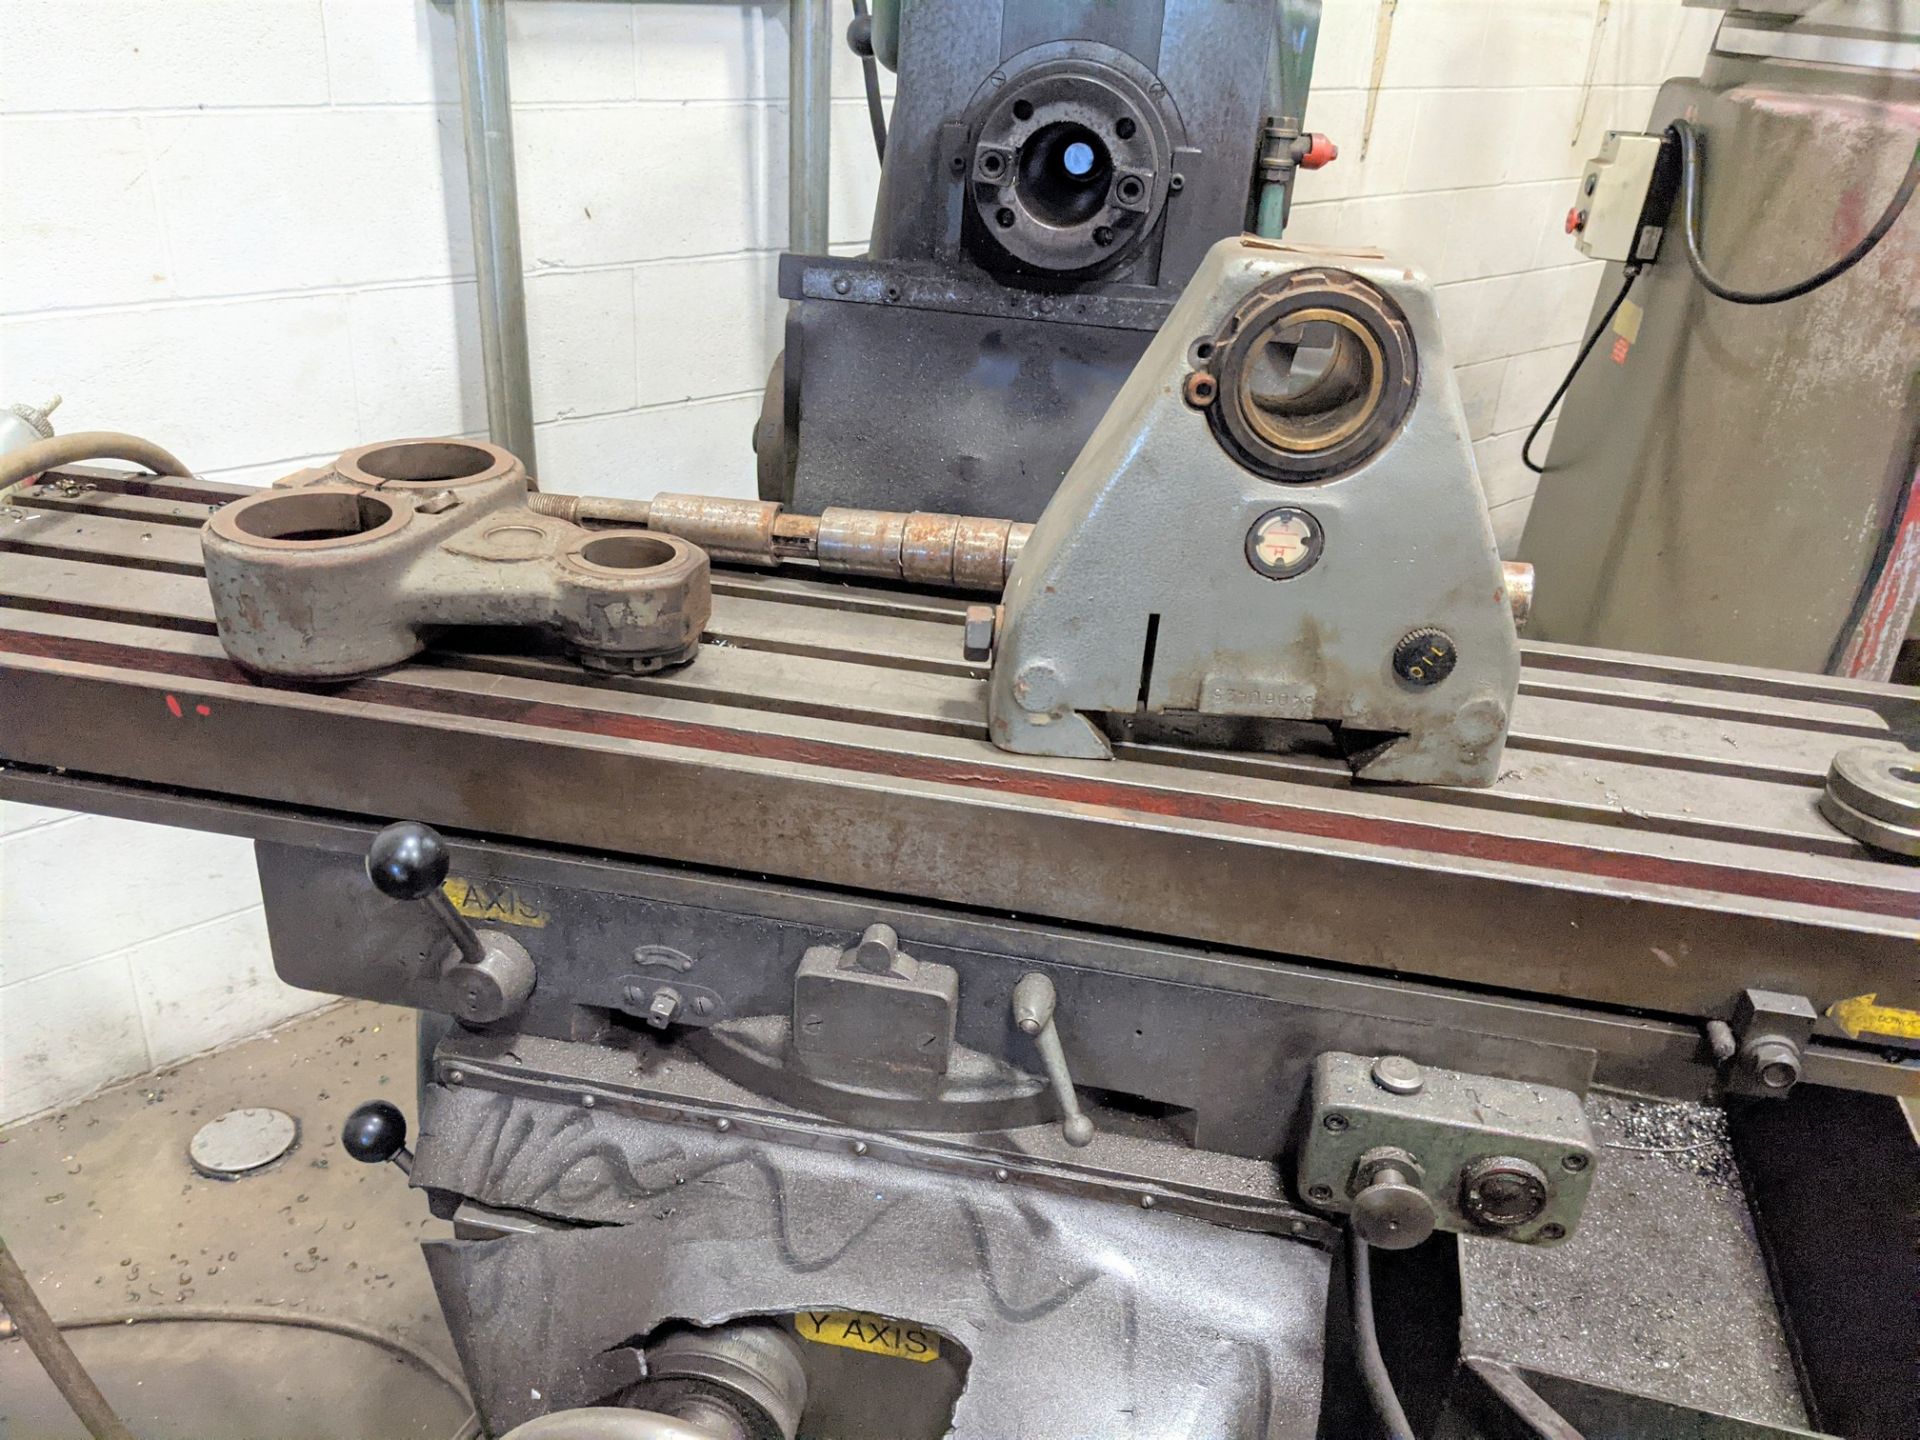 SAJO UF-54DM UNIVERSAL MILLING MACHINE, 11” X 52” TABLE, 50 TAPER, S/N 681444 W/ ARBOR SUPPORTS - Image 3 of 6